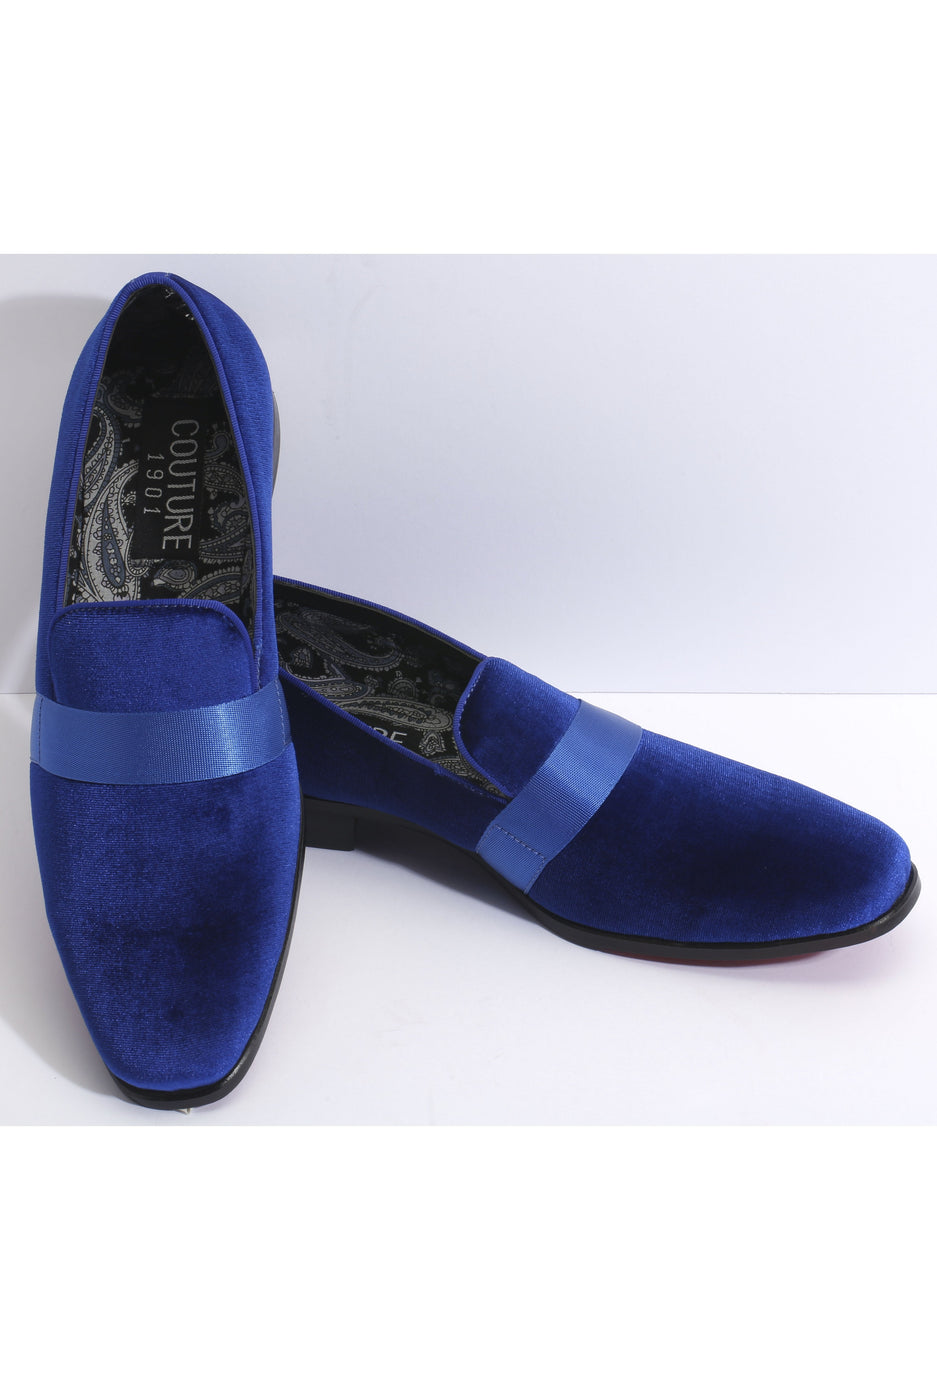 Couture 1901 "Lincoln" Royal Blue Couture 1901 Tuxedo Shoes